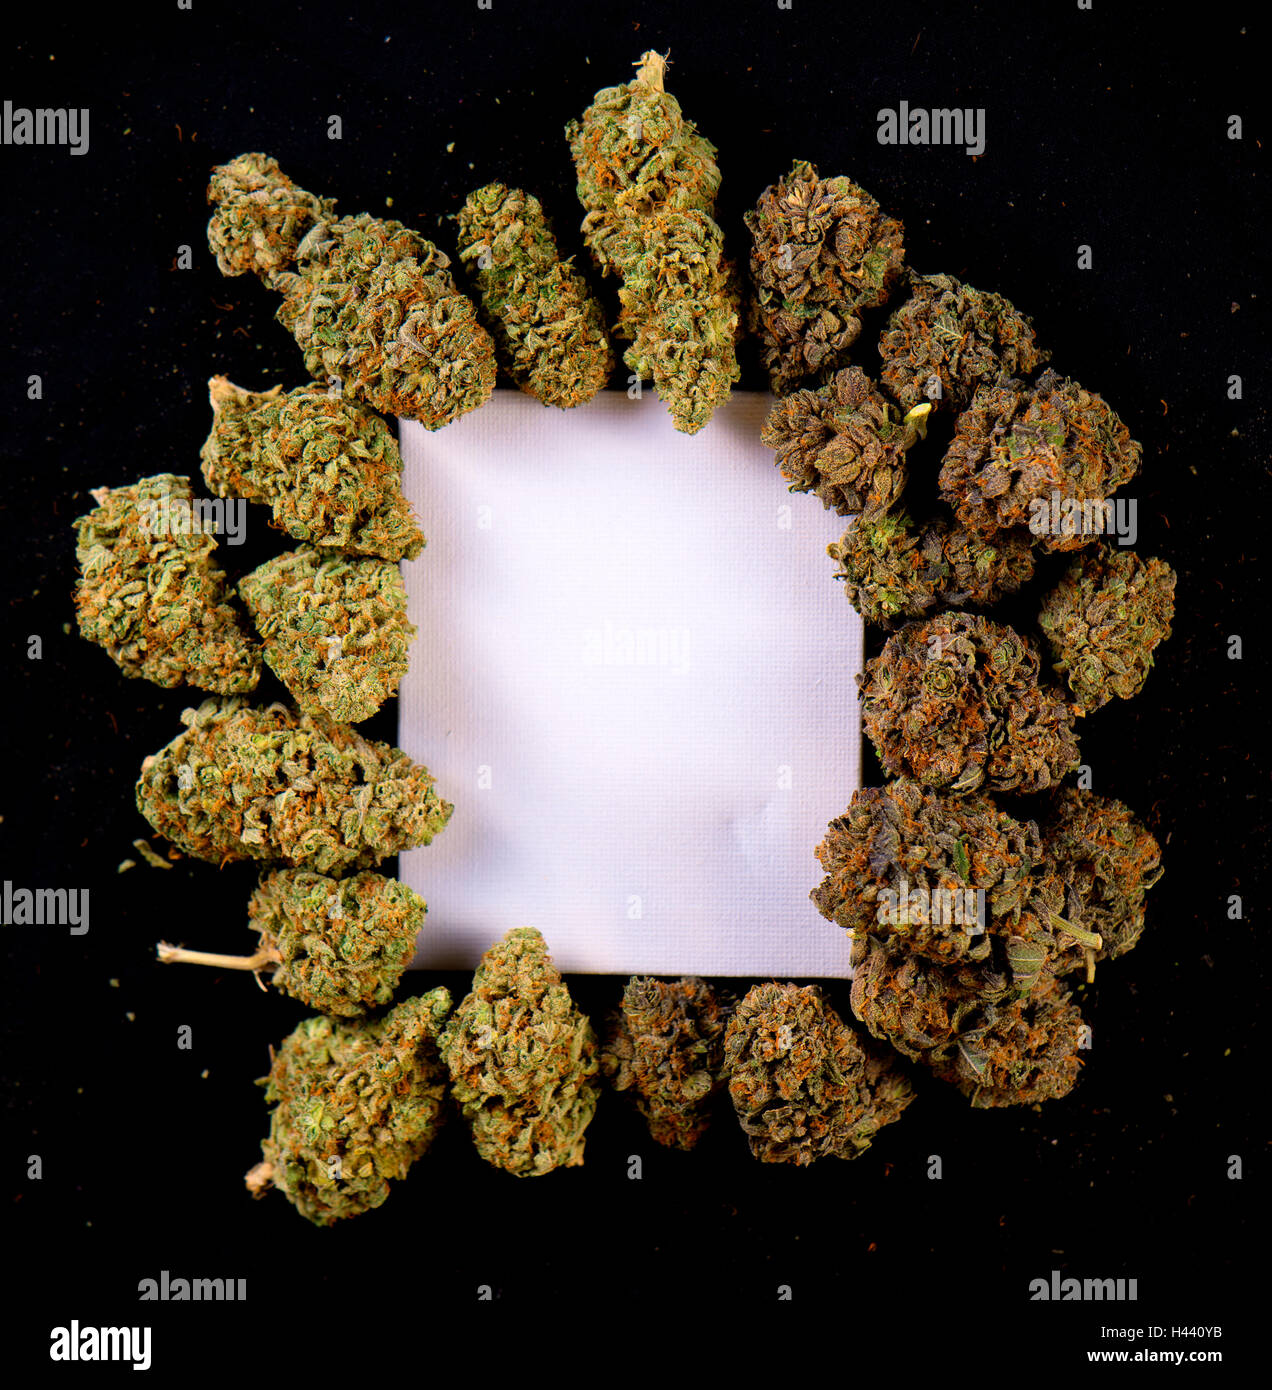 Blank canvas framed by dried cannabis buds, indica and sativa strains - isolated on black background Stock Photo